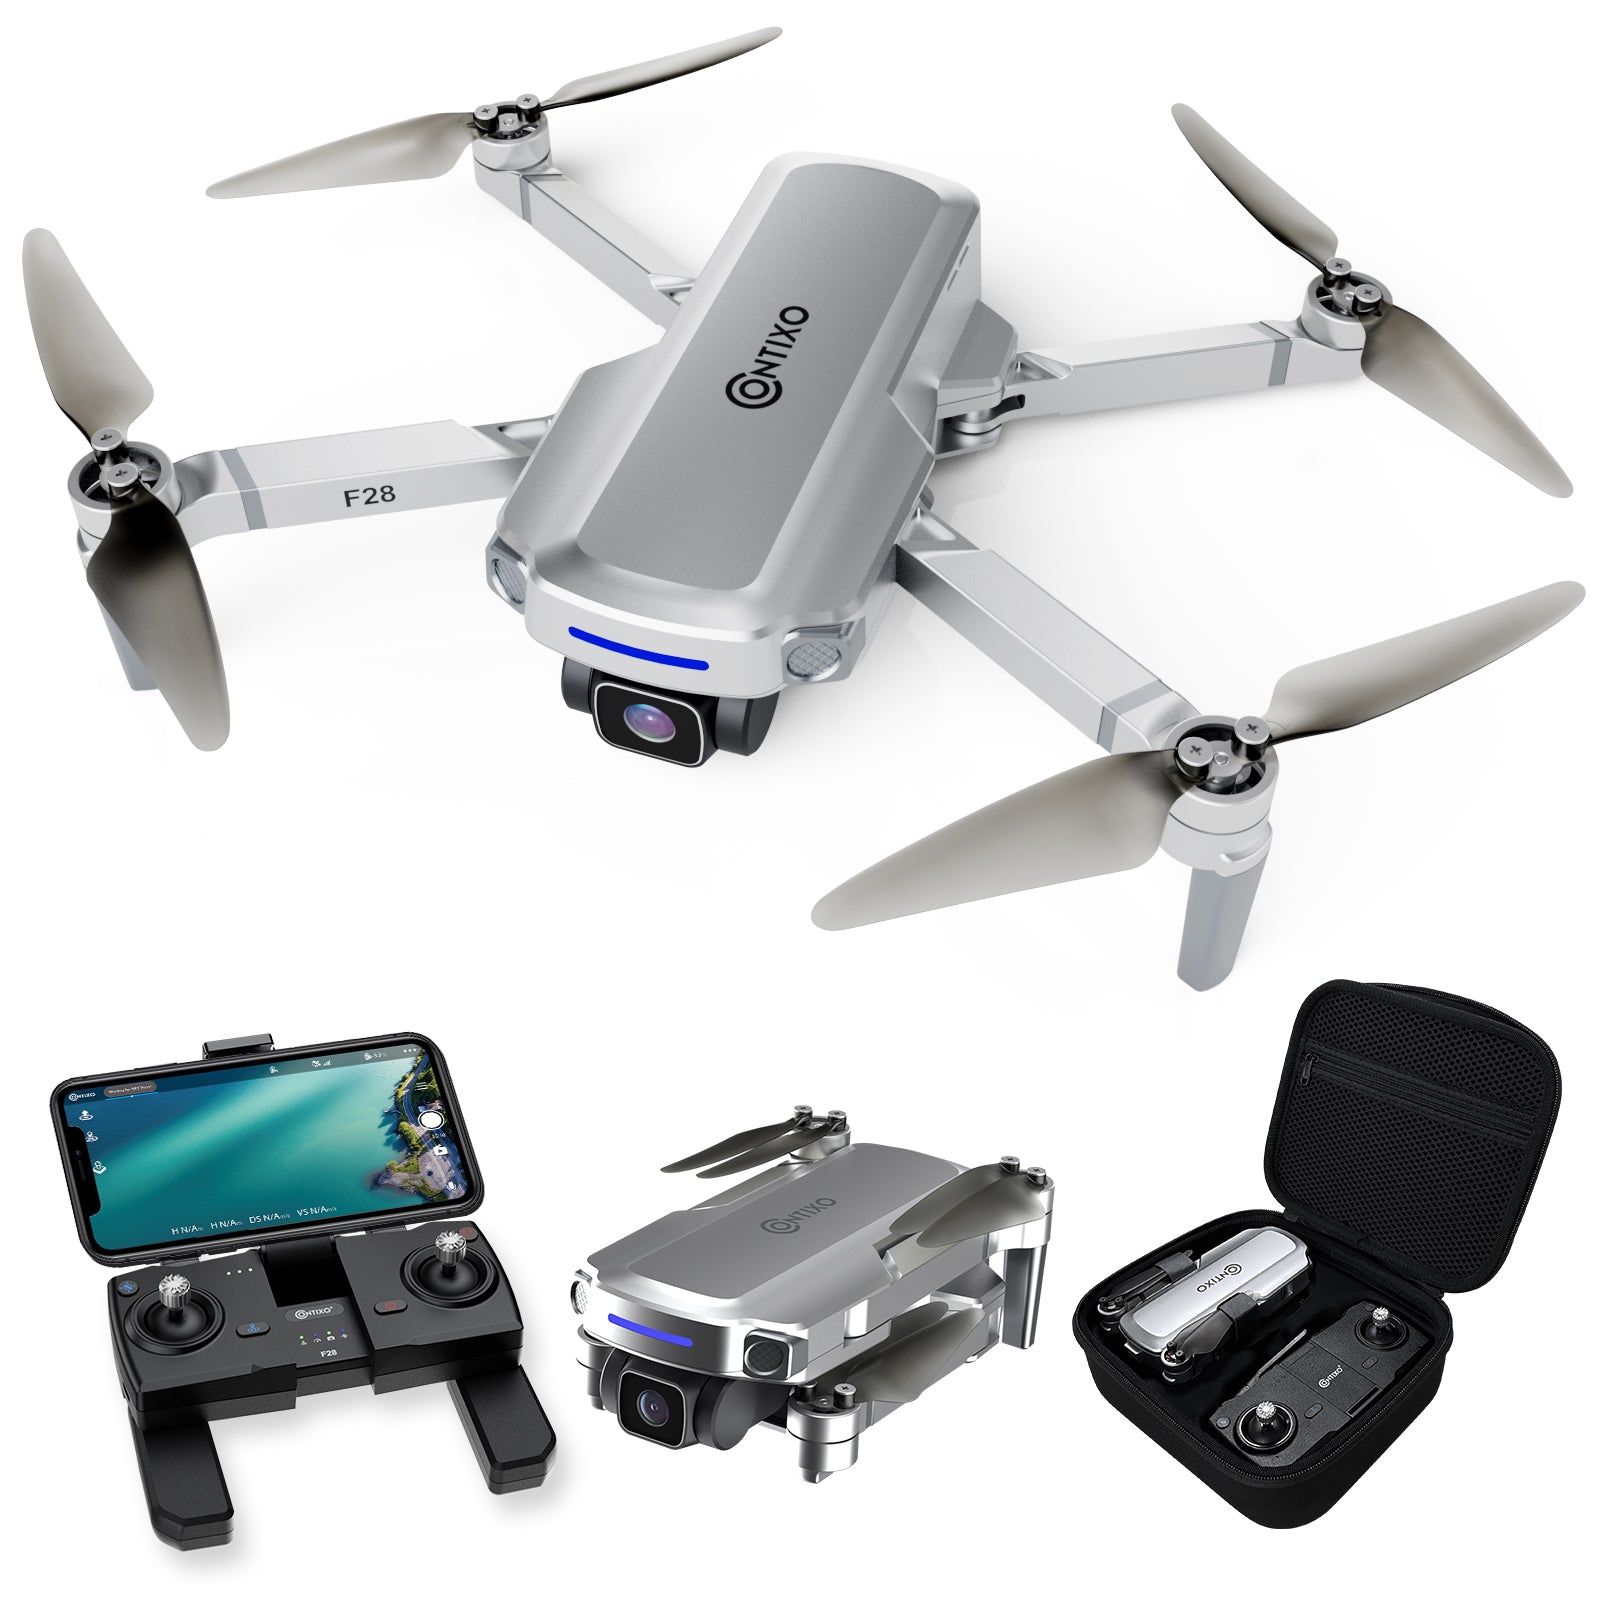 Discover the Best Beginners Self-Flying Camera Drone